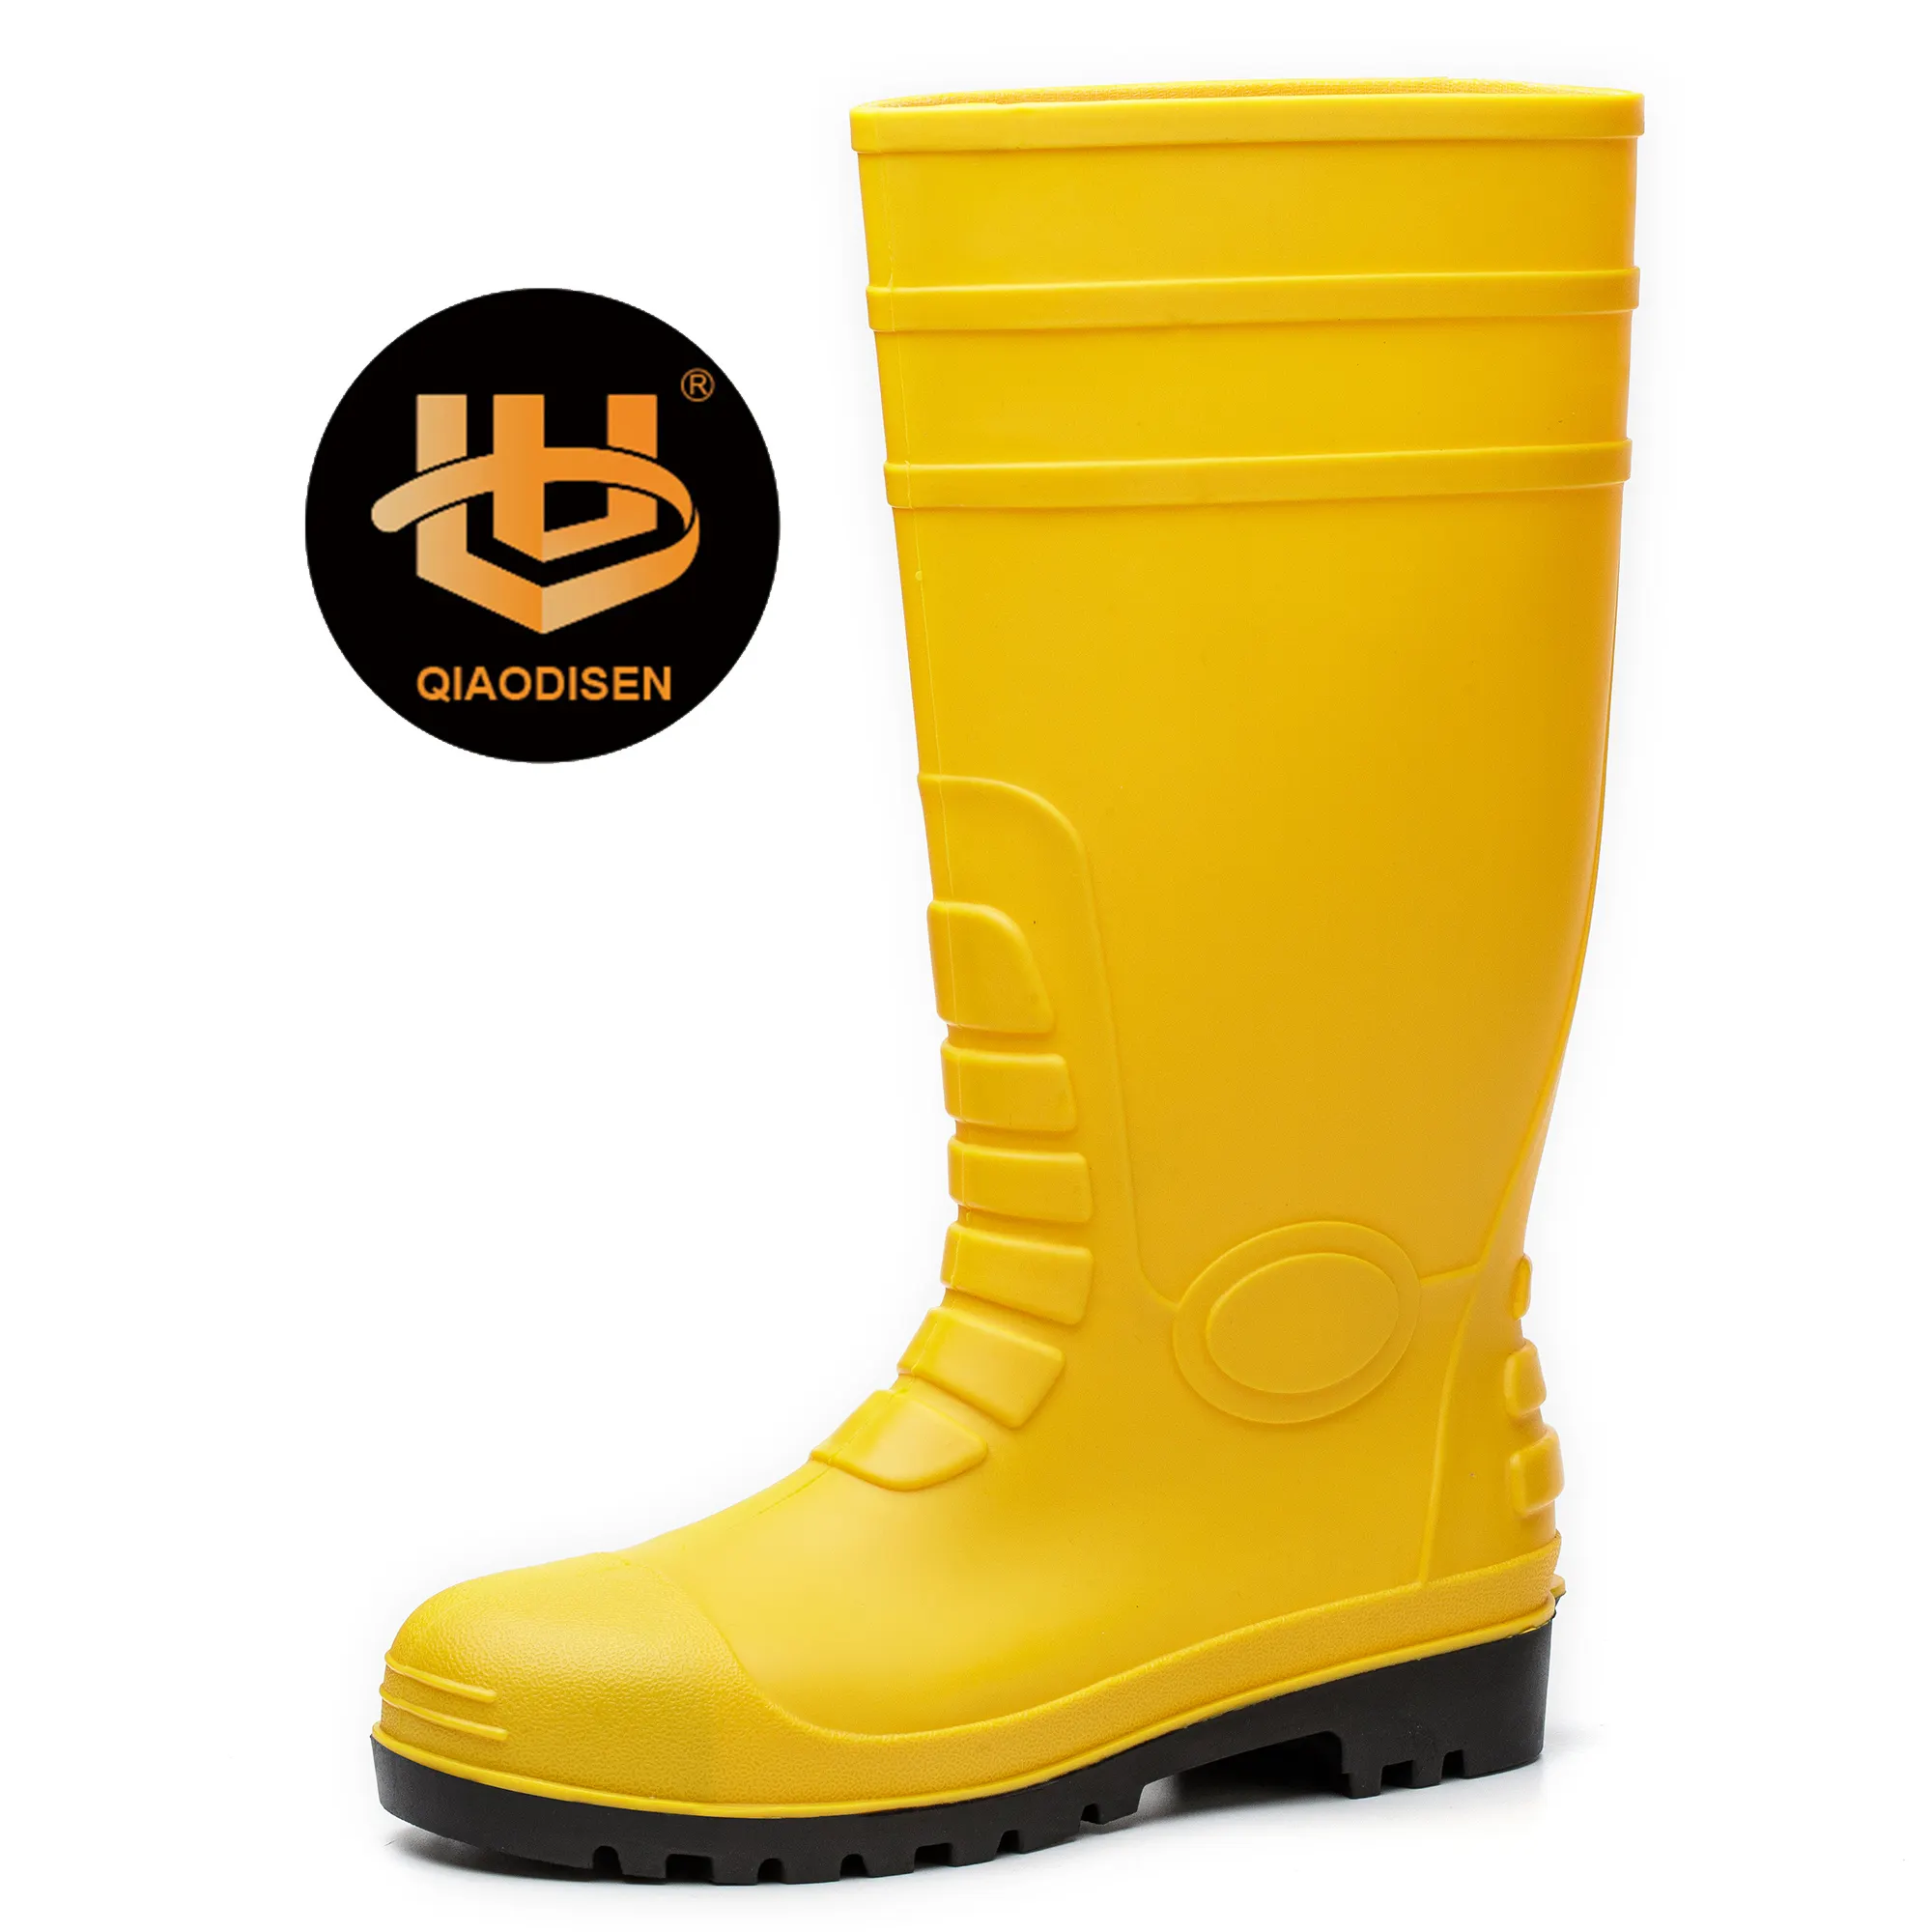 Hot-selling Plastic PVC Anti-smashing Anti-puncture Safety Rain Boots For Men And Women